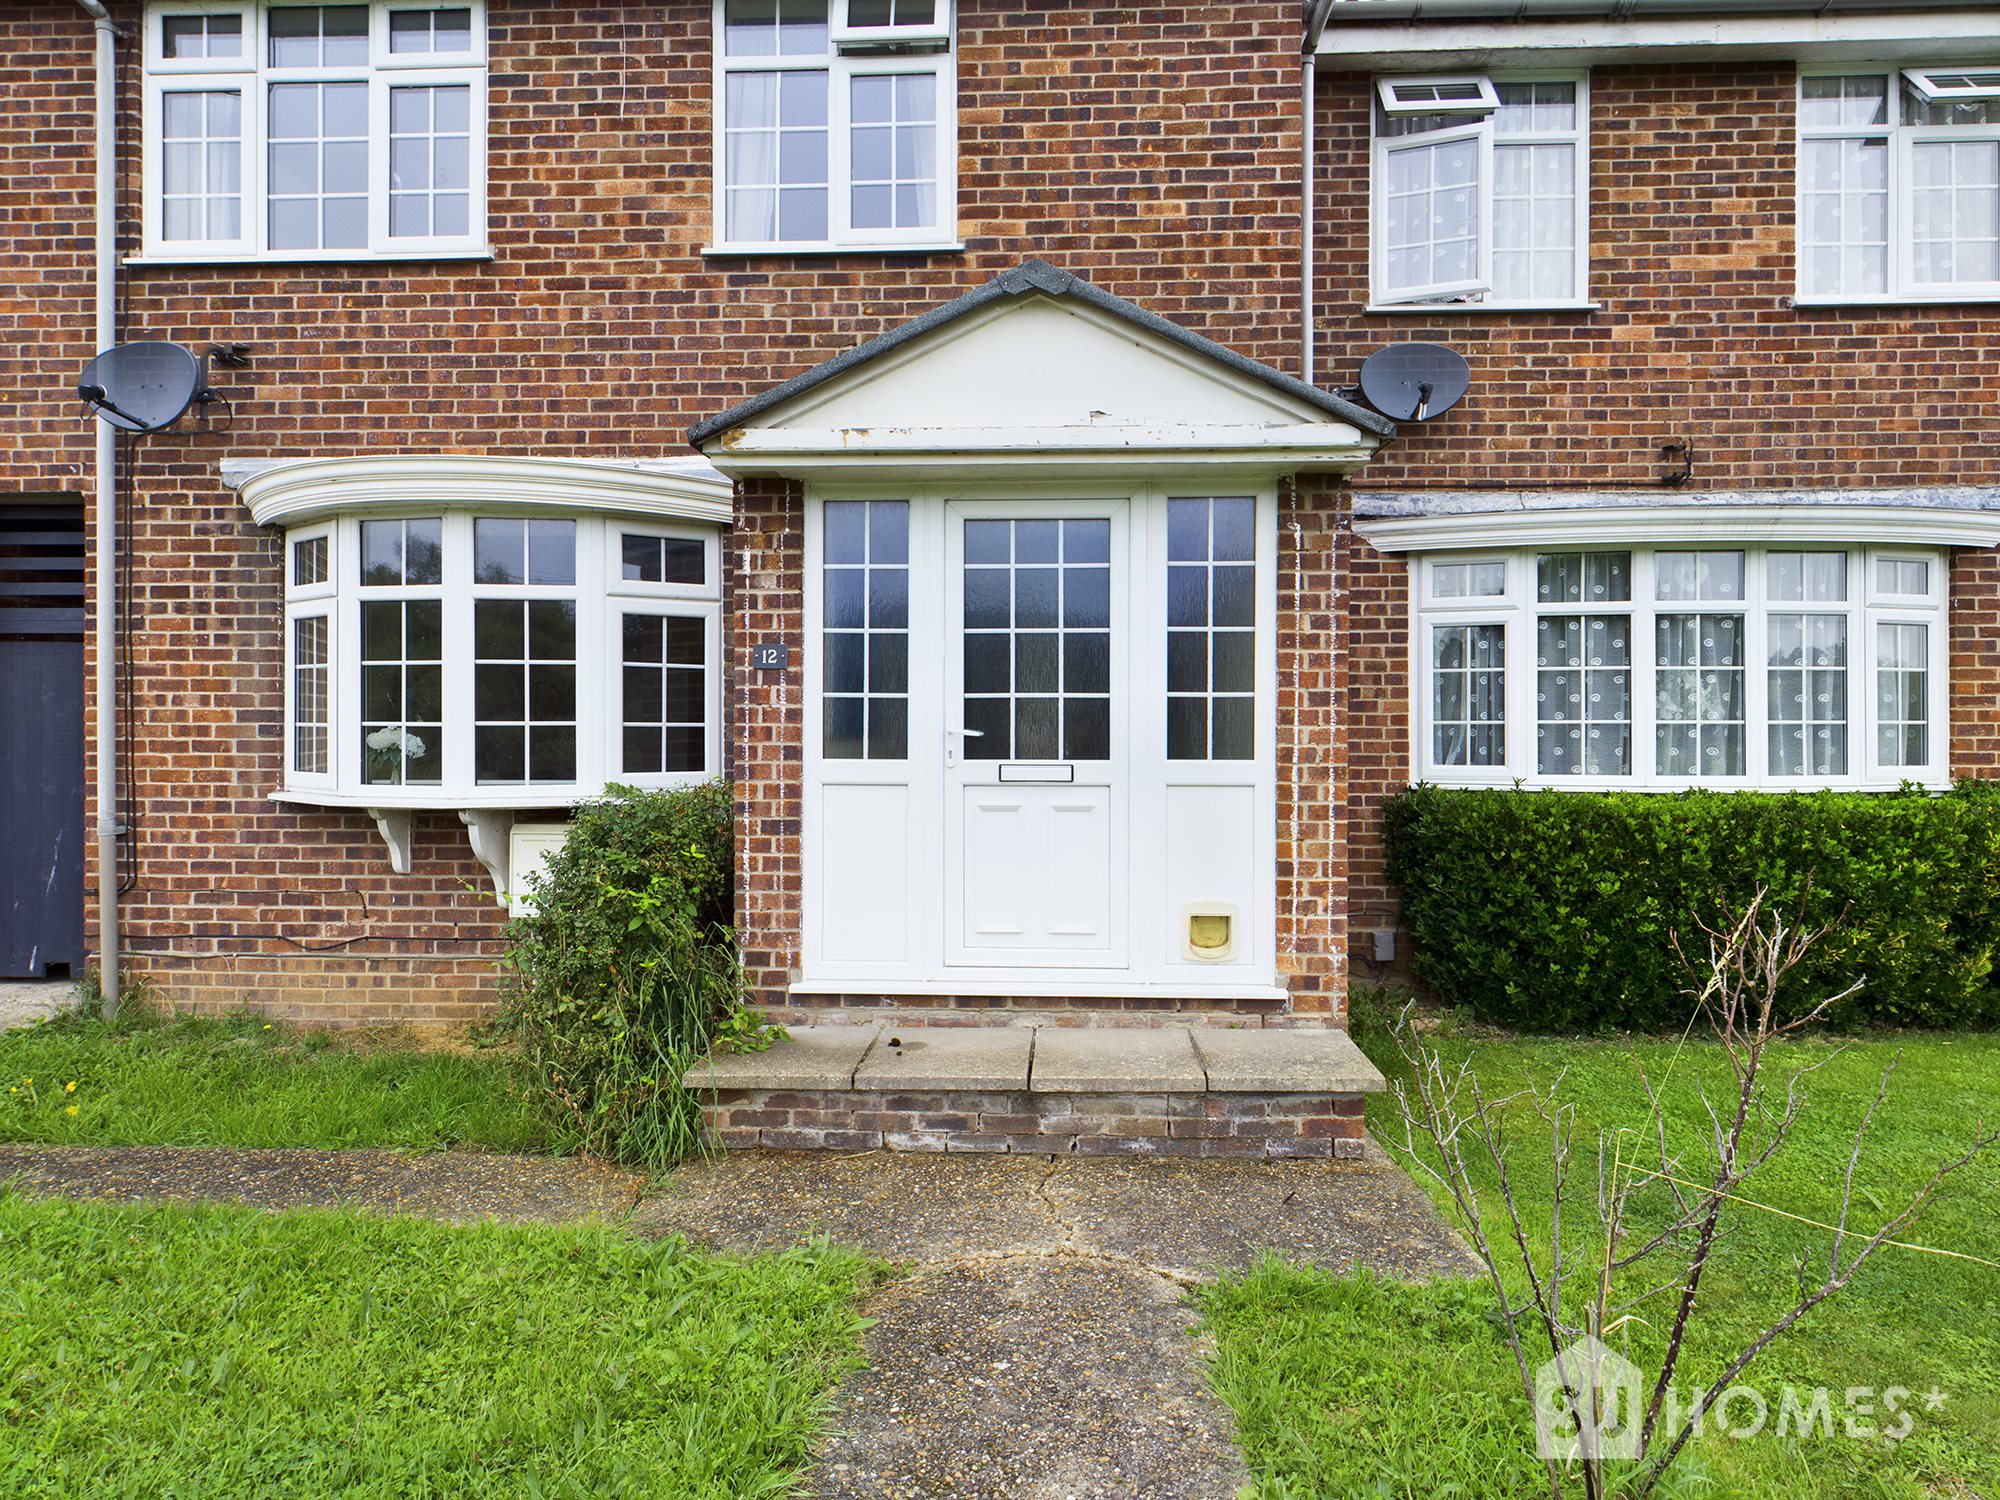 3 bed house to rent in Pickford Walk, Greenstead, CO4 